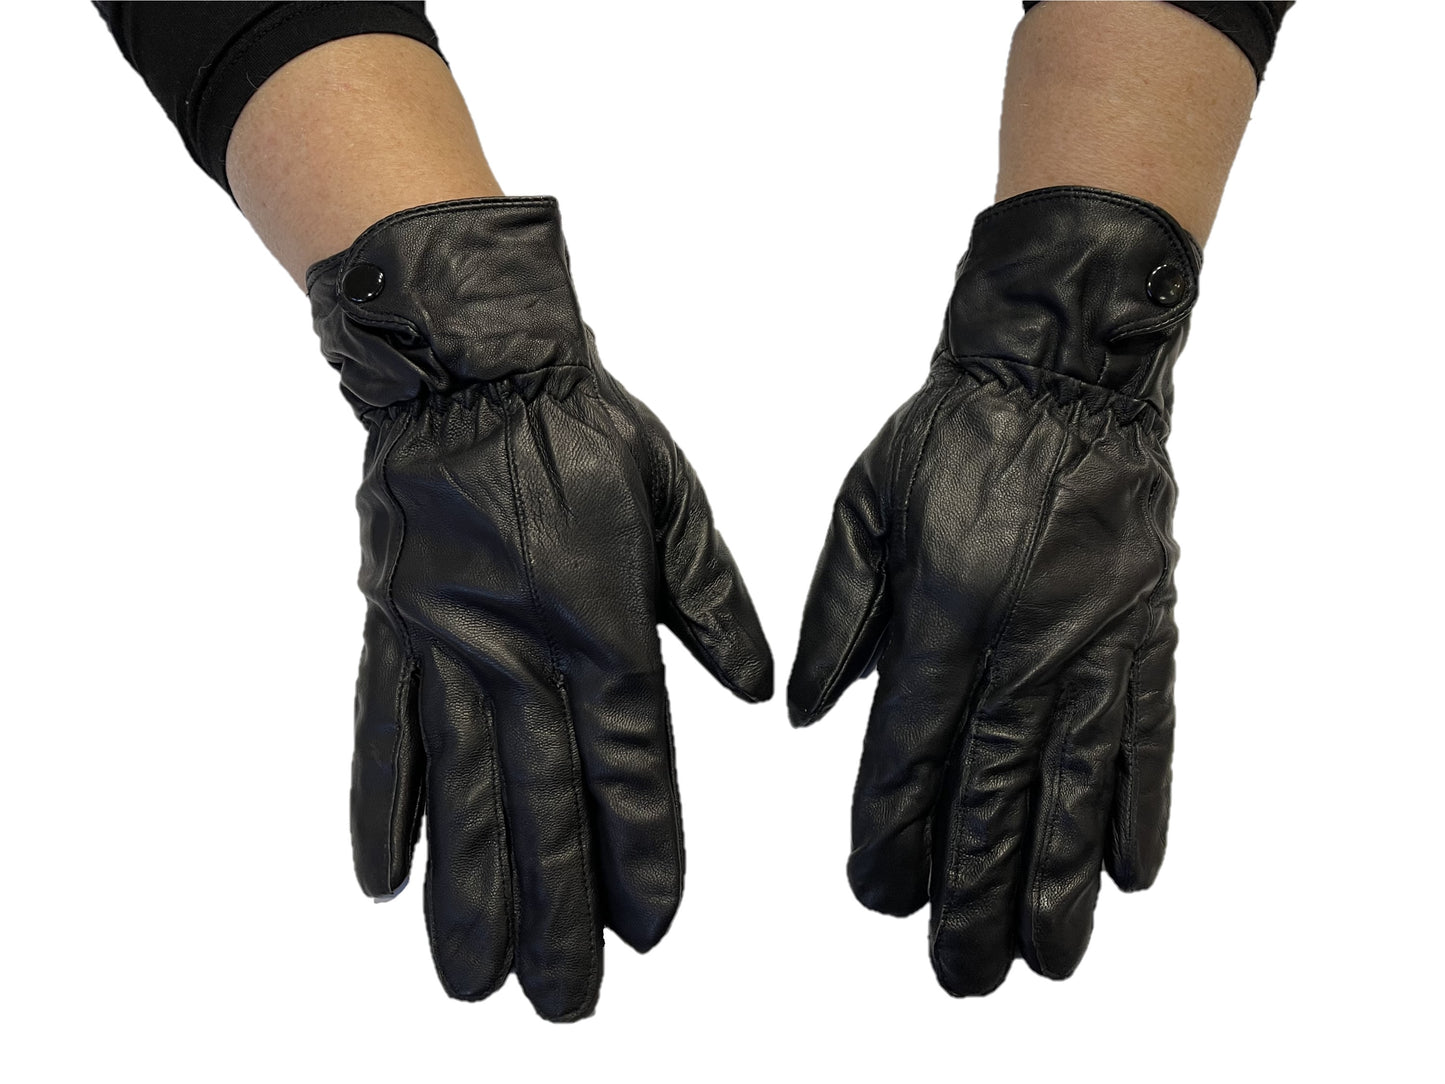 Ladies Black Leather Gloves Women's Soft Warm Lined Winter